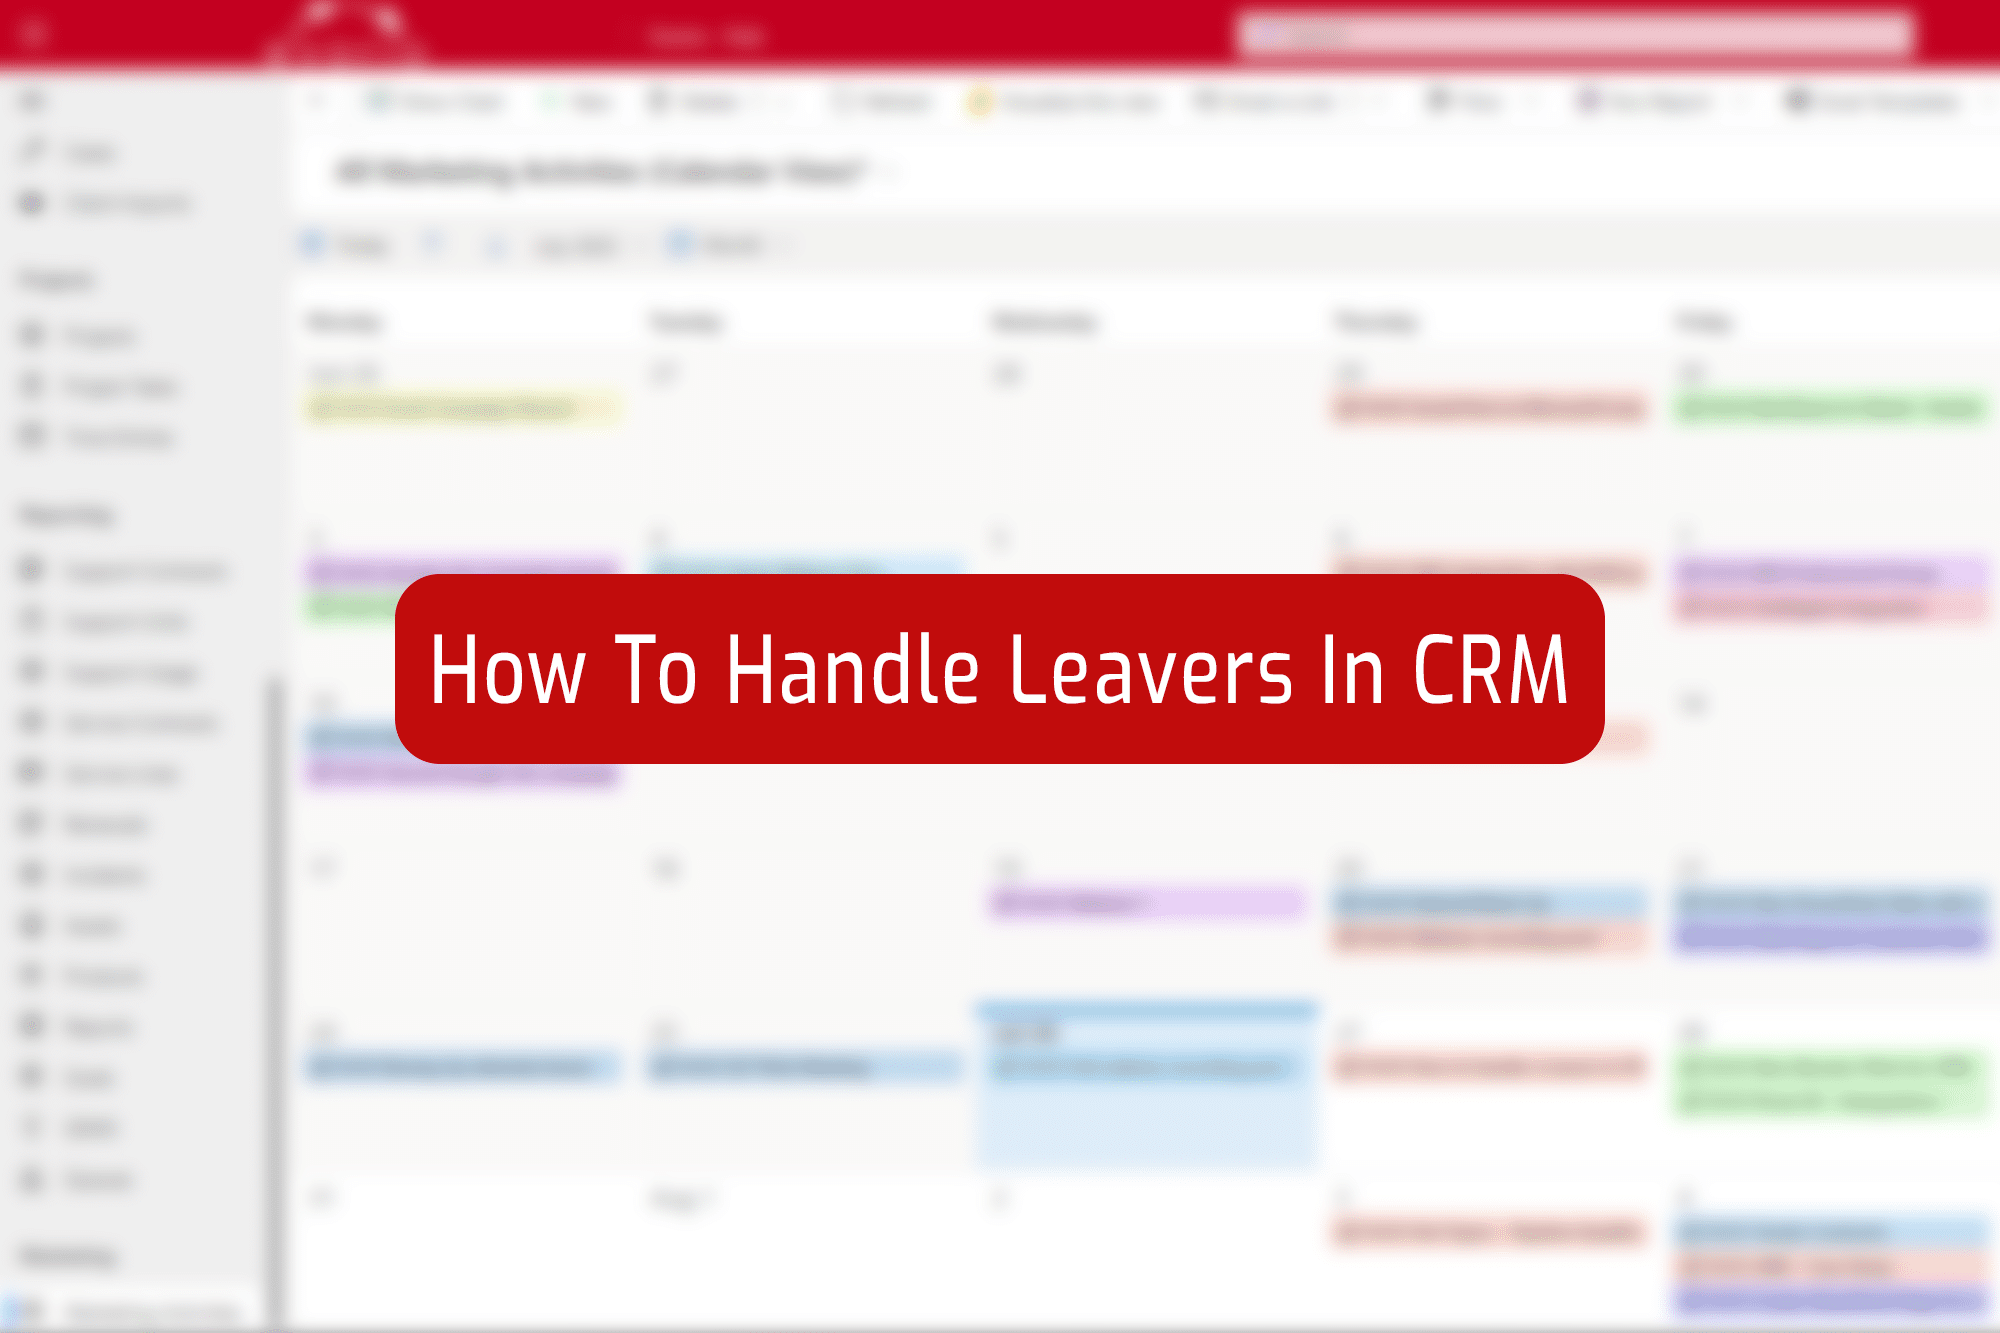 A blurred image of a CRM dashboard, with the caption "How to handle a leaver in CRM" inside a red box with rounded corners